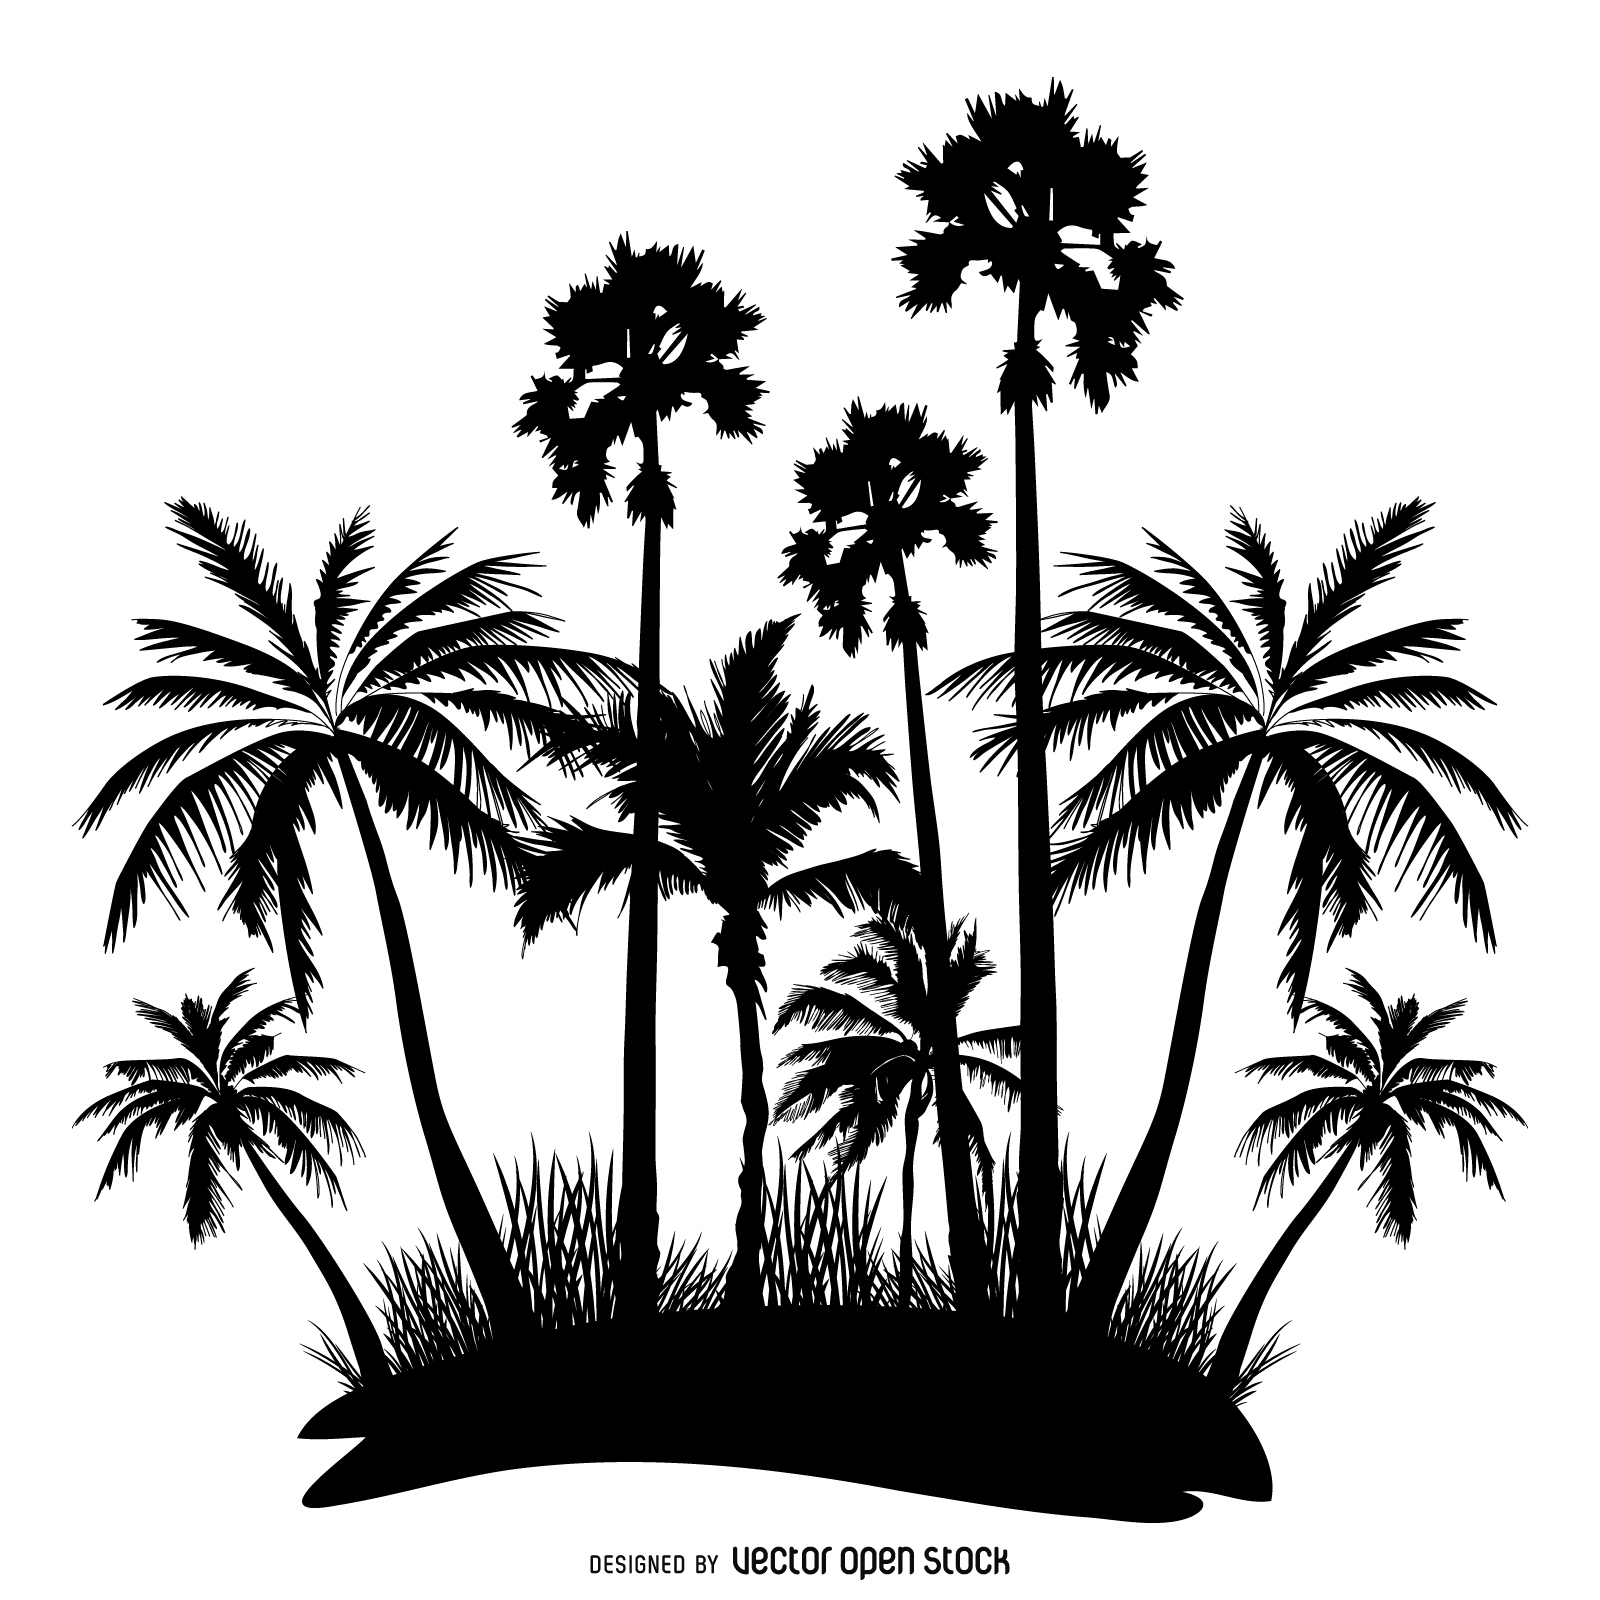 Palm trees silhouette illustration - Vector download